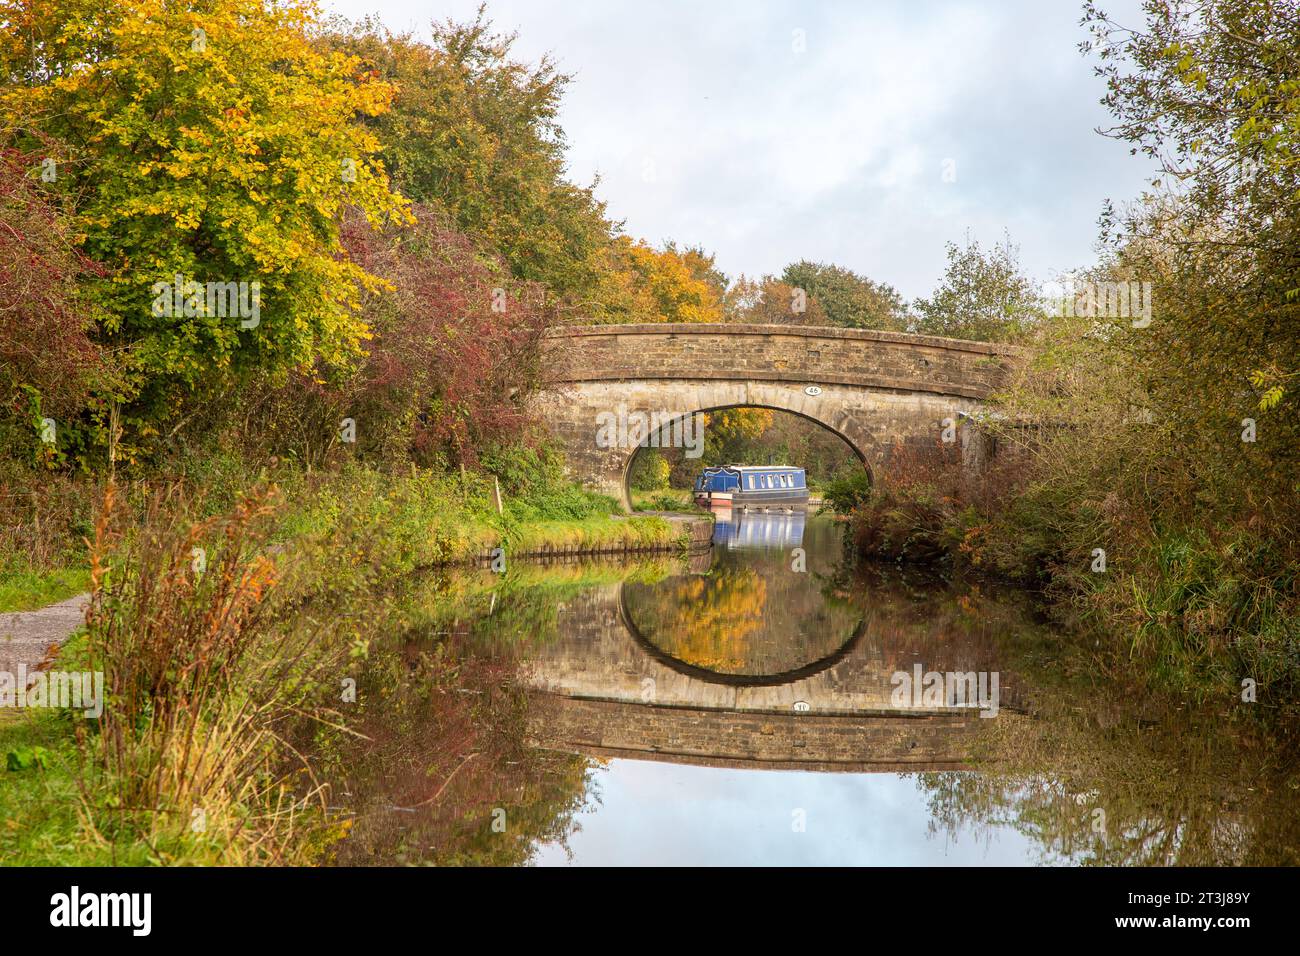 Narrowboat on the Macclesfield canal that runs between Kidsgrove in Staffordshire to the junction at Marple Greater Manchester Stock Photo